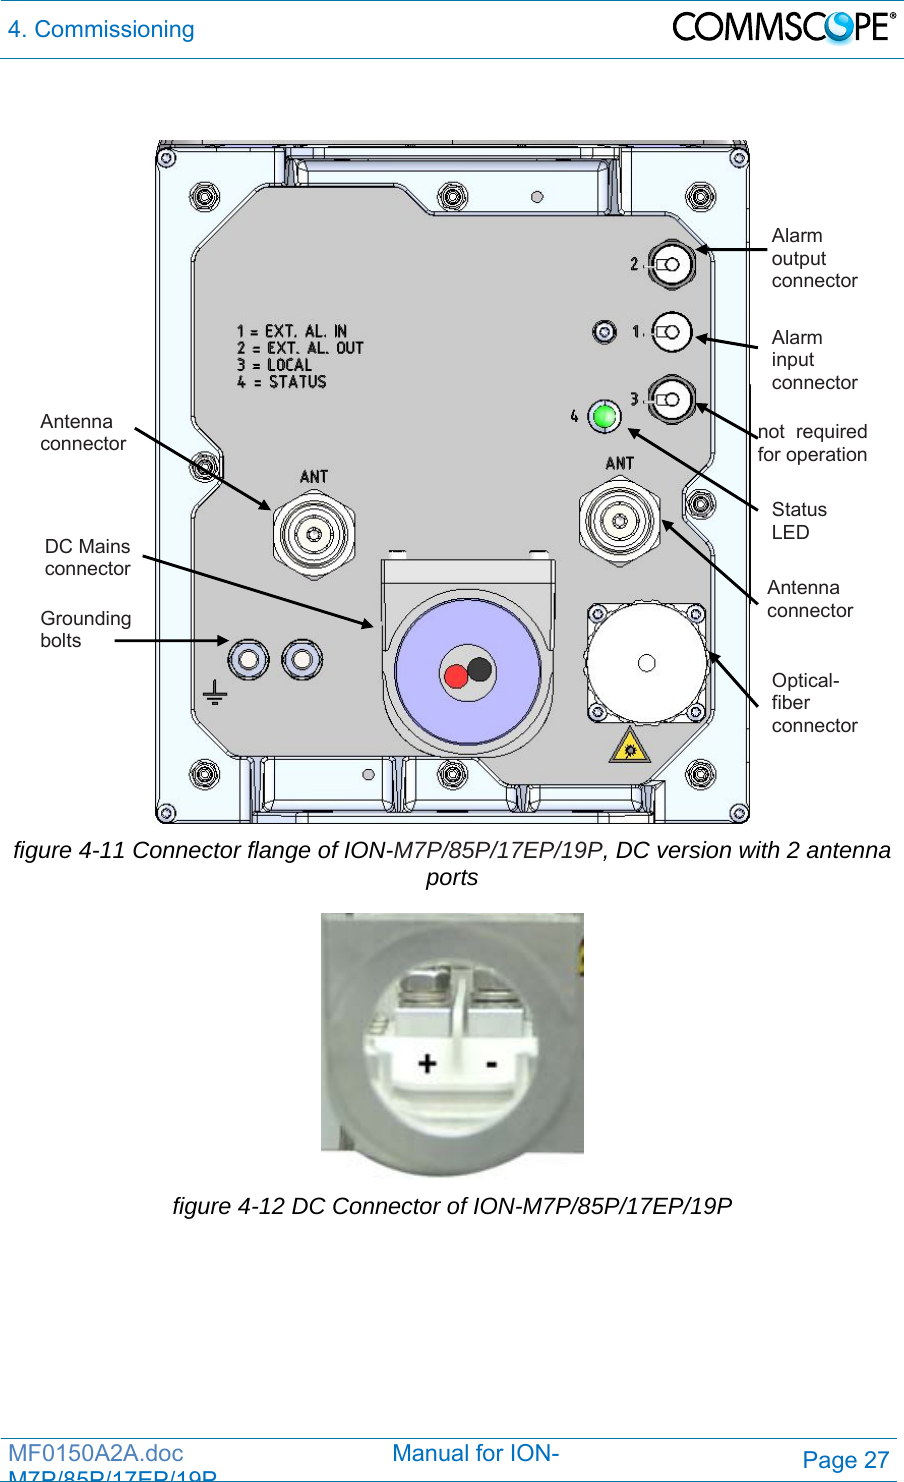 4. Commissioning  MF0150A2A.doc                                Manual for ION-M7P/85P/17EP/19PPage 27    figure 4-11 Connector flange of ION-M7P/85P/17EP/19P, DC version with 2 antenna ports  figure 4-12 DC Connector of ION-M7P/85P/17EP/19P  DC Mains connector Grounding bolts Optical-fiber connector Status LED Antenna connector  Alarm input connector Alarm output connector not requiredfor operationAntenna connector 